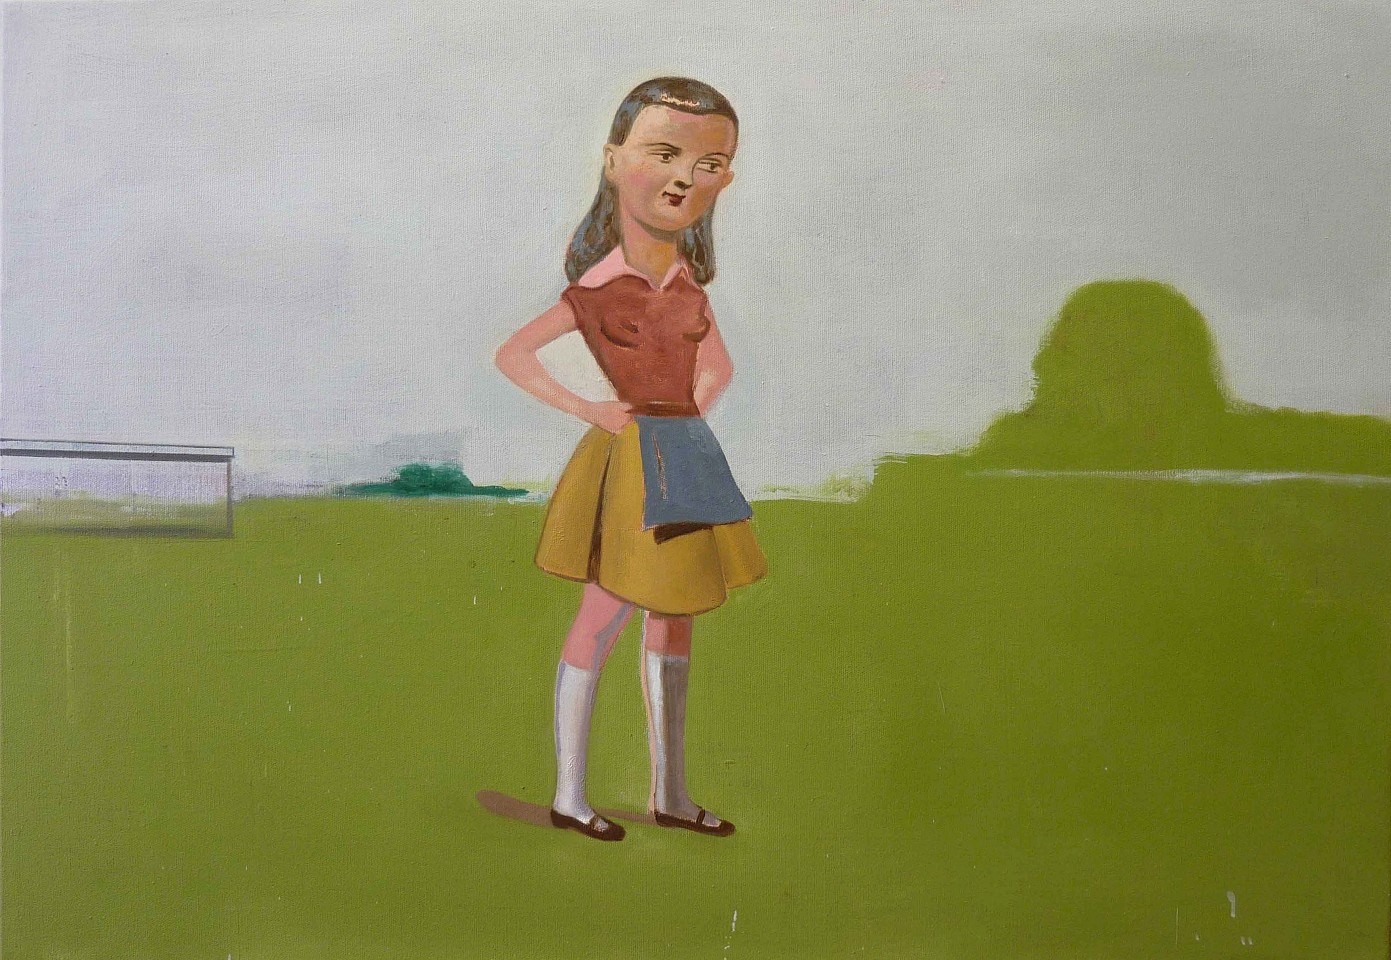 Stephanus Heidacker, Kopie Akimbo, 2009
oil on canvas, 31.5" x 45.28"
figurative, contemporary, bright colors, earth colors, humorous
STEPH-373-Location-Berlin
Price Upon Request